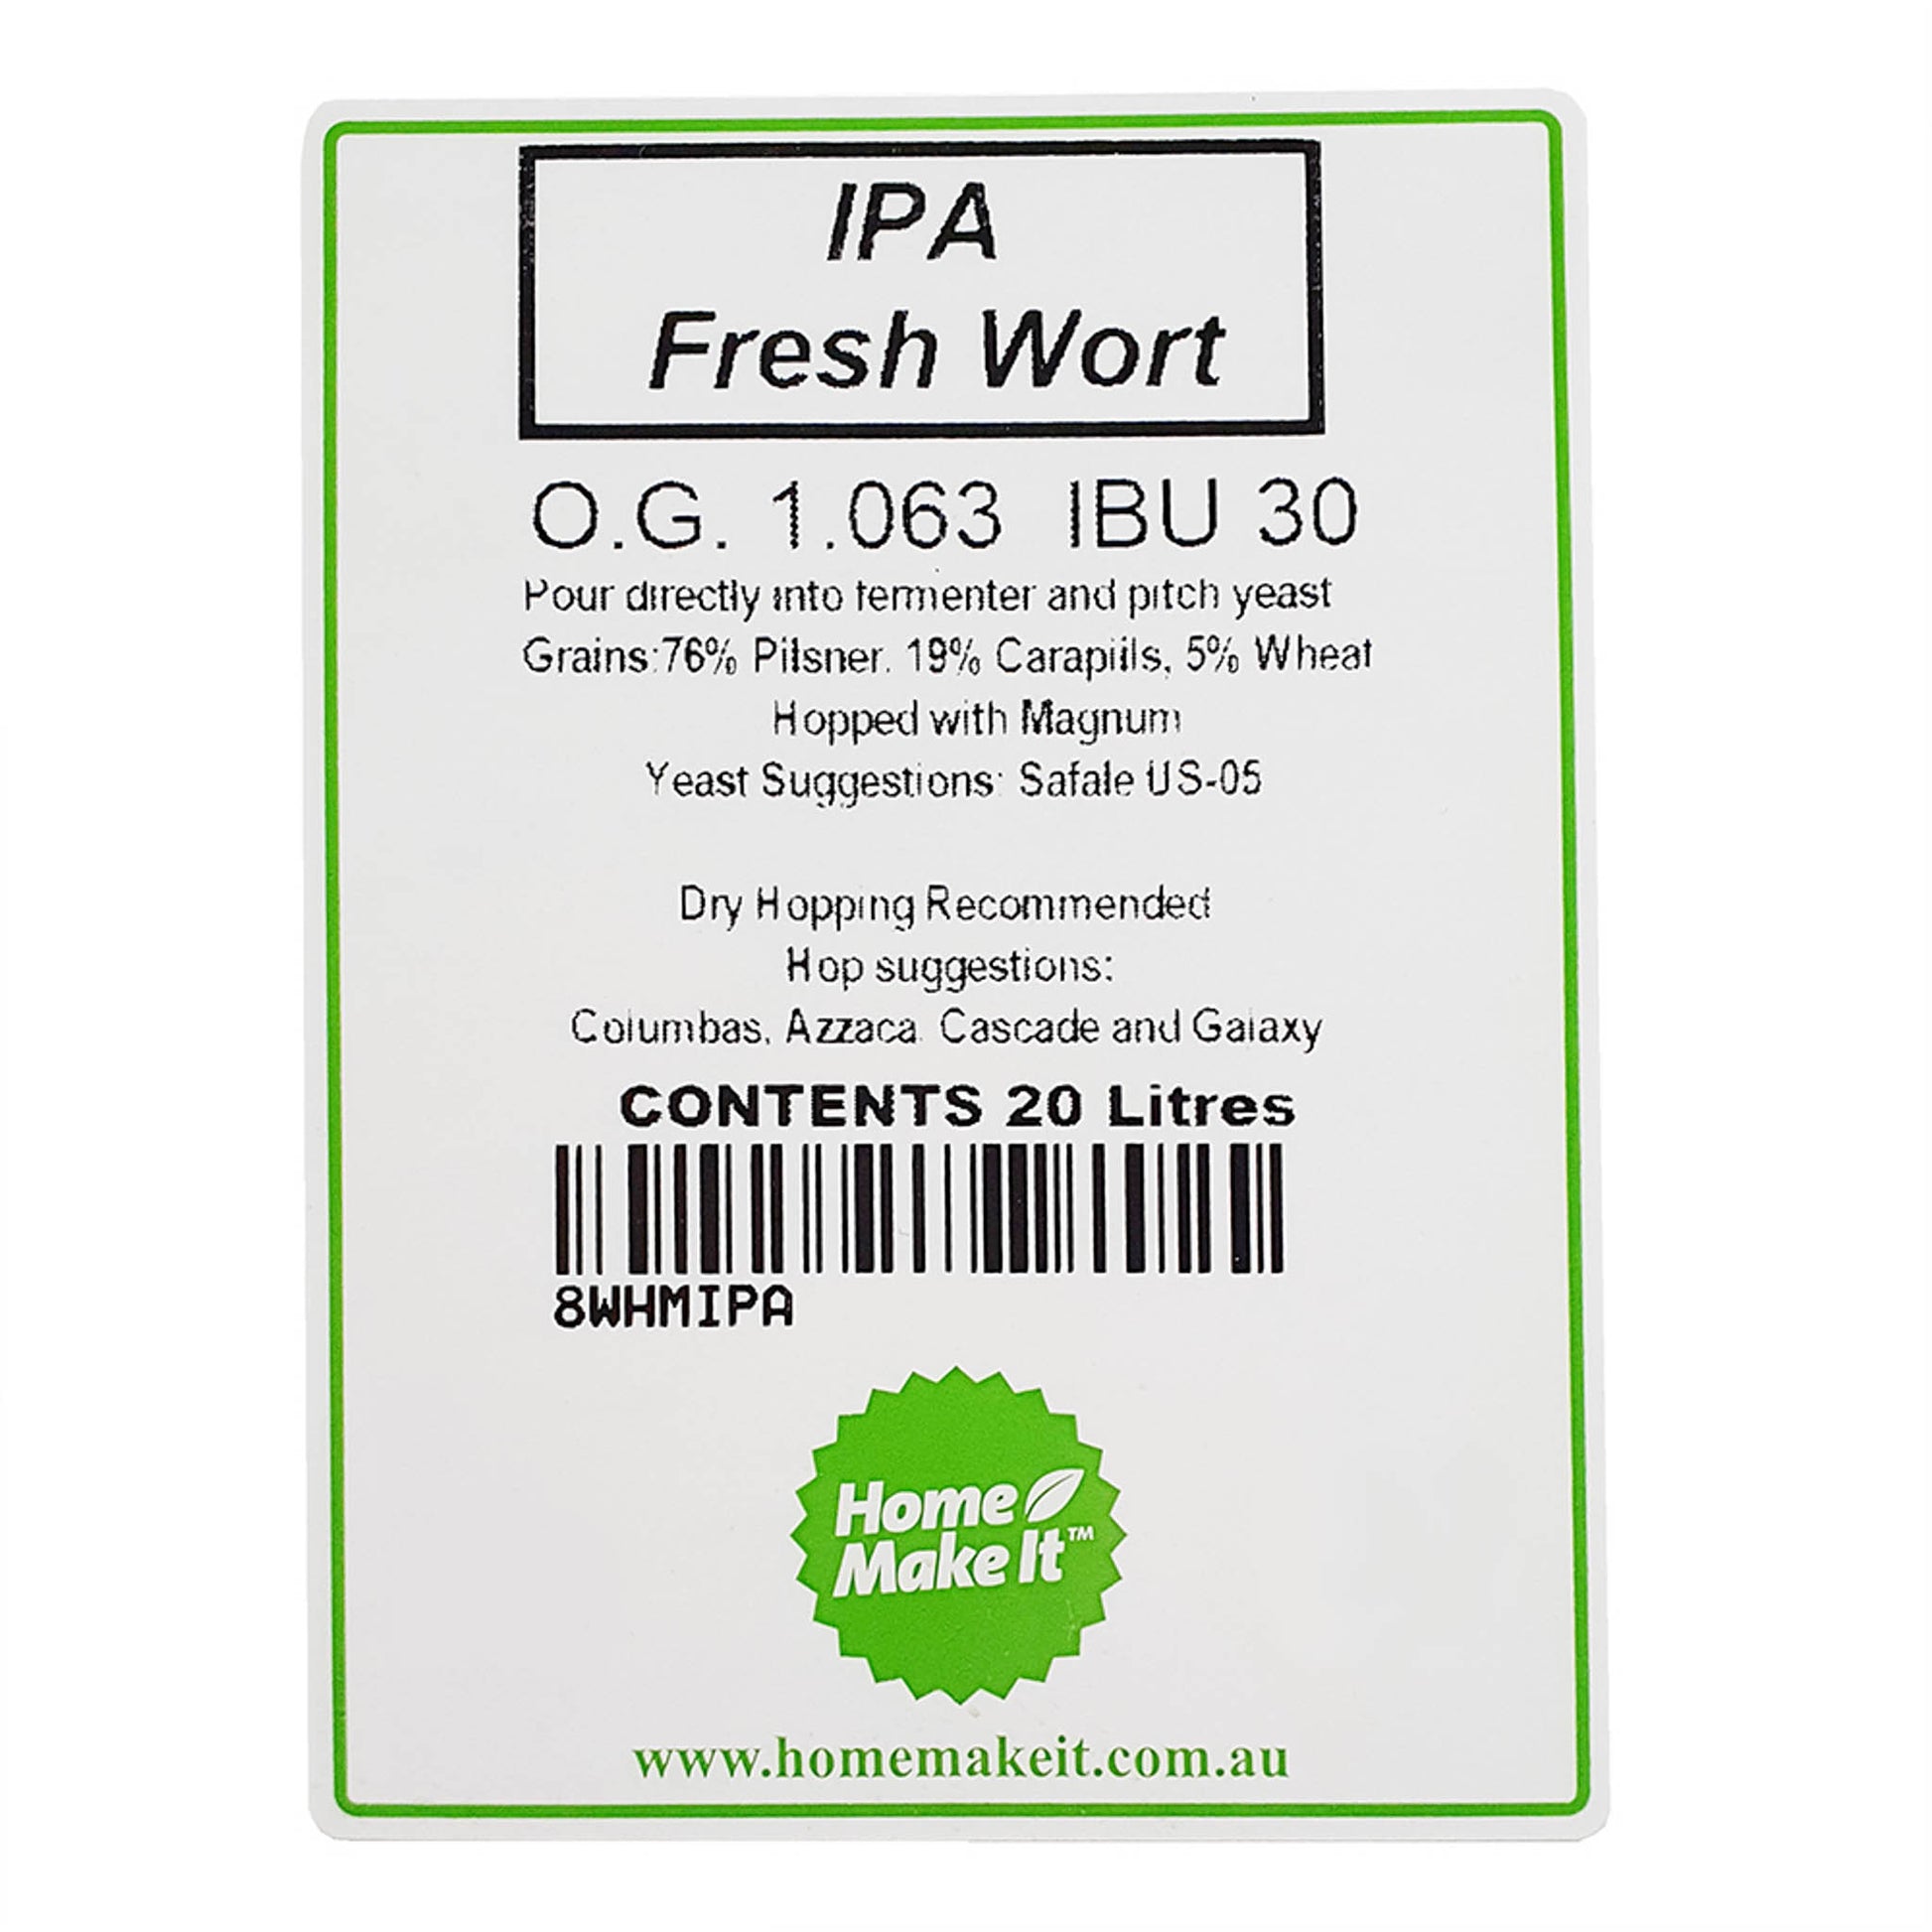 Indian Pale Ale fresh wort kit information and instructions